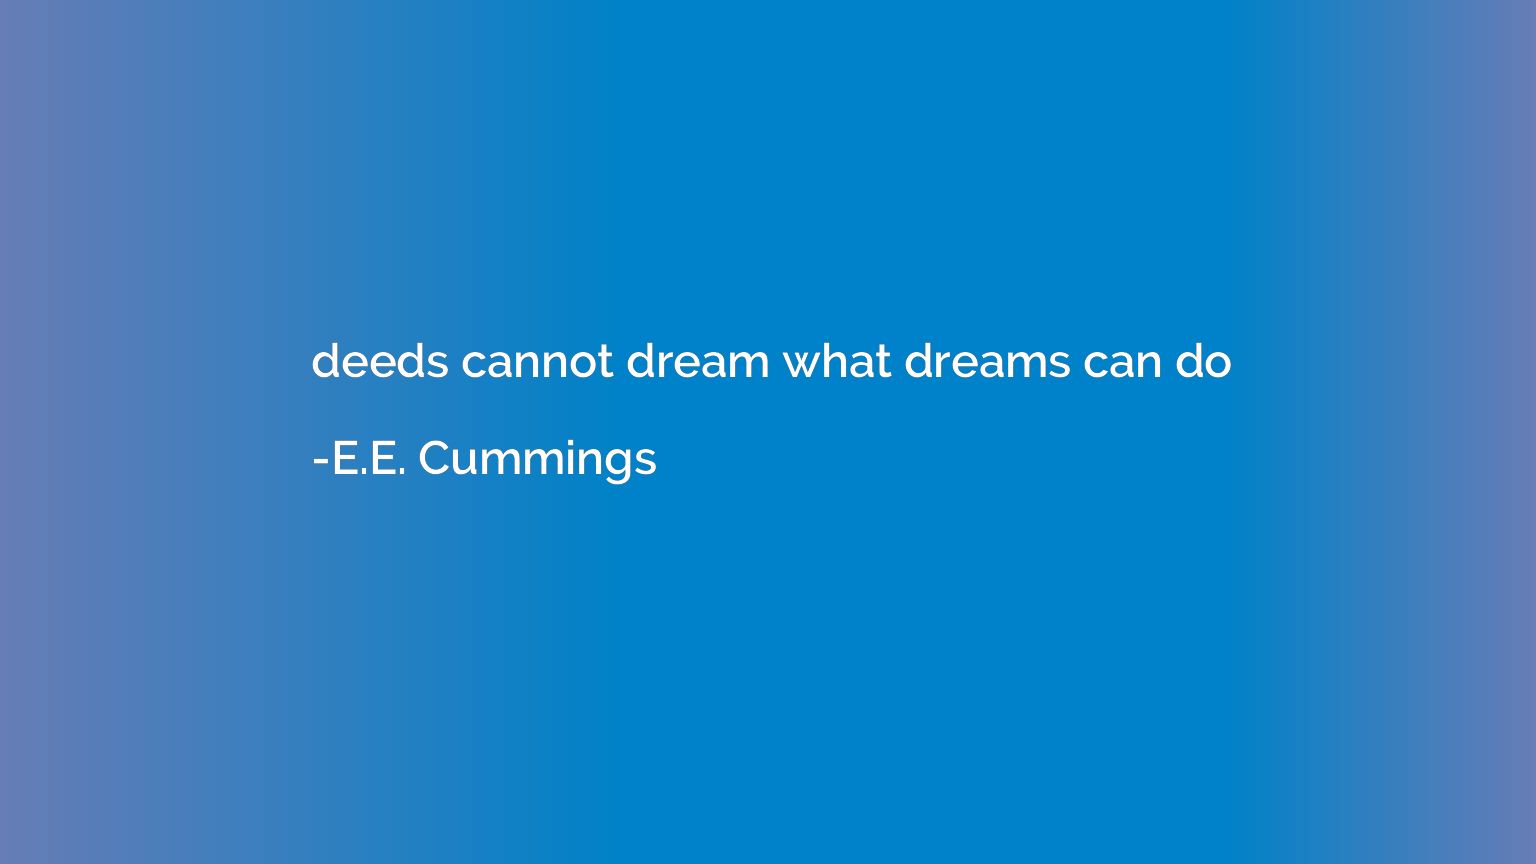 deeds cannot dream what dreams can do